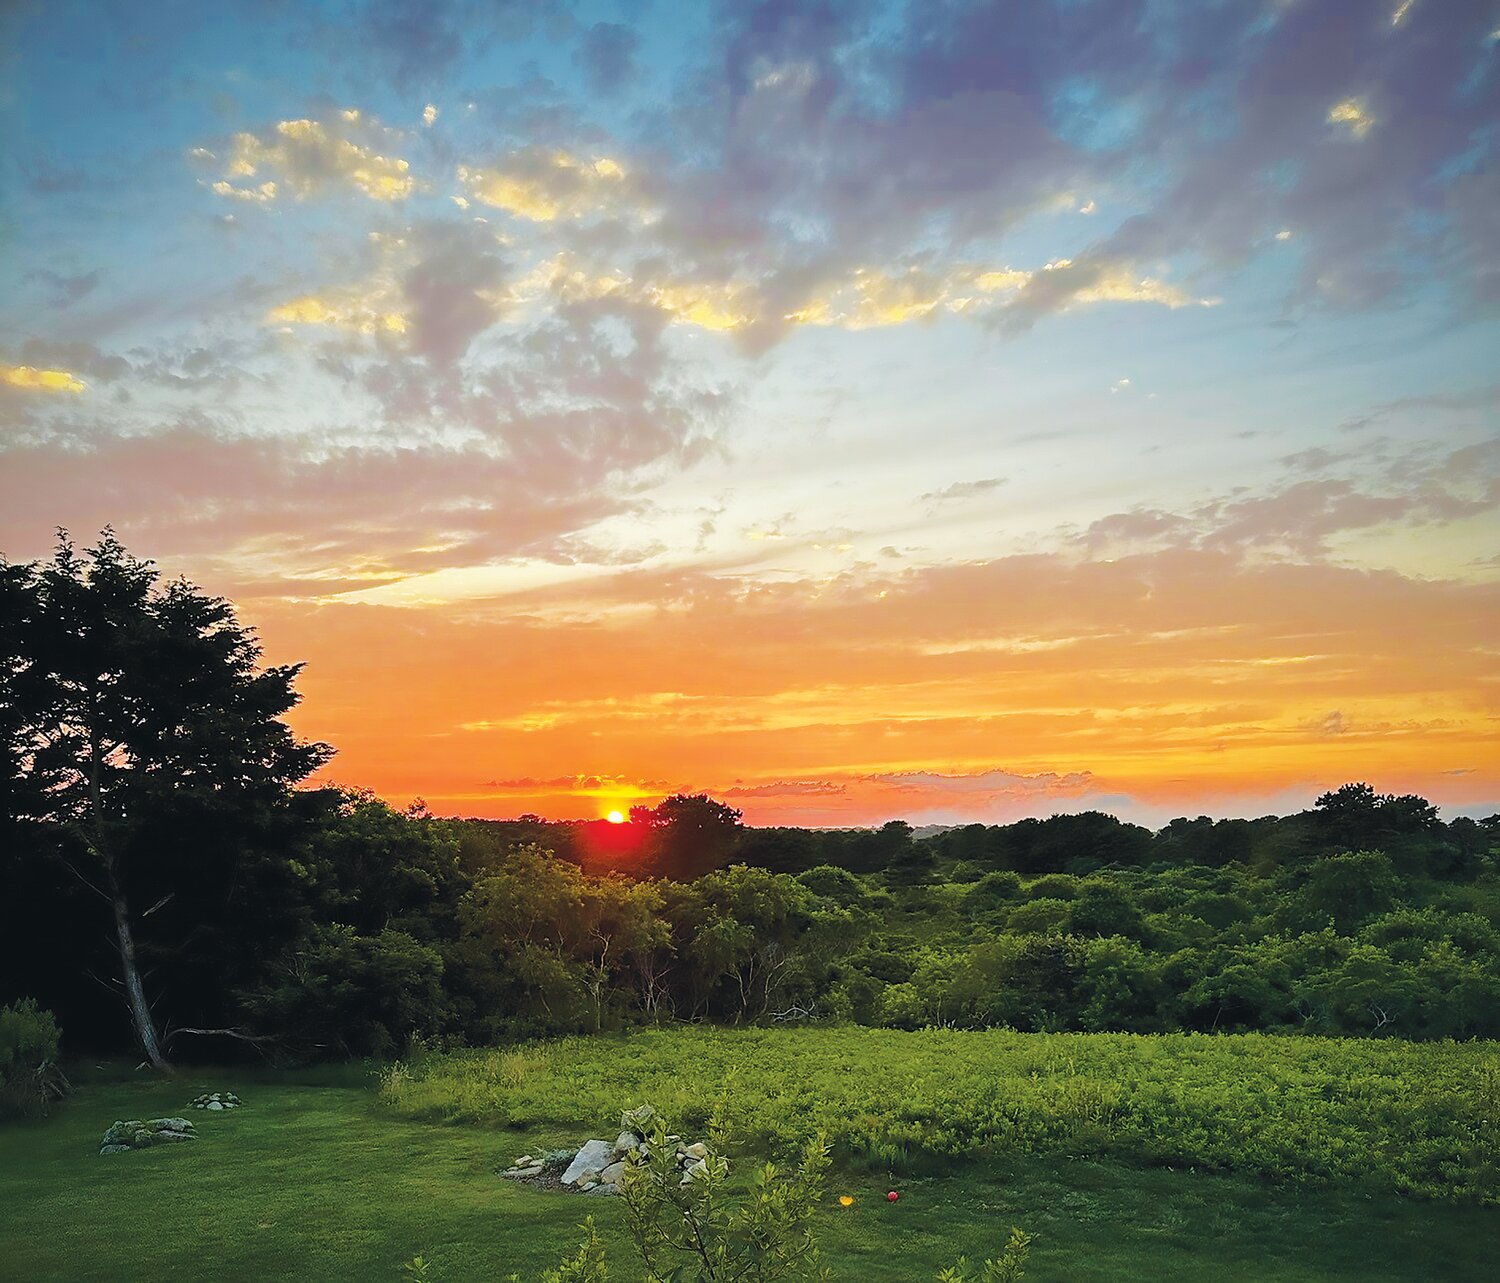 Situated high on a knoll, the 2.7-acre Madaket Road property is bordered by conservation land and is a wonderful place to take in sunsets off the island’s west end.